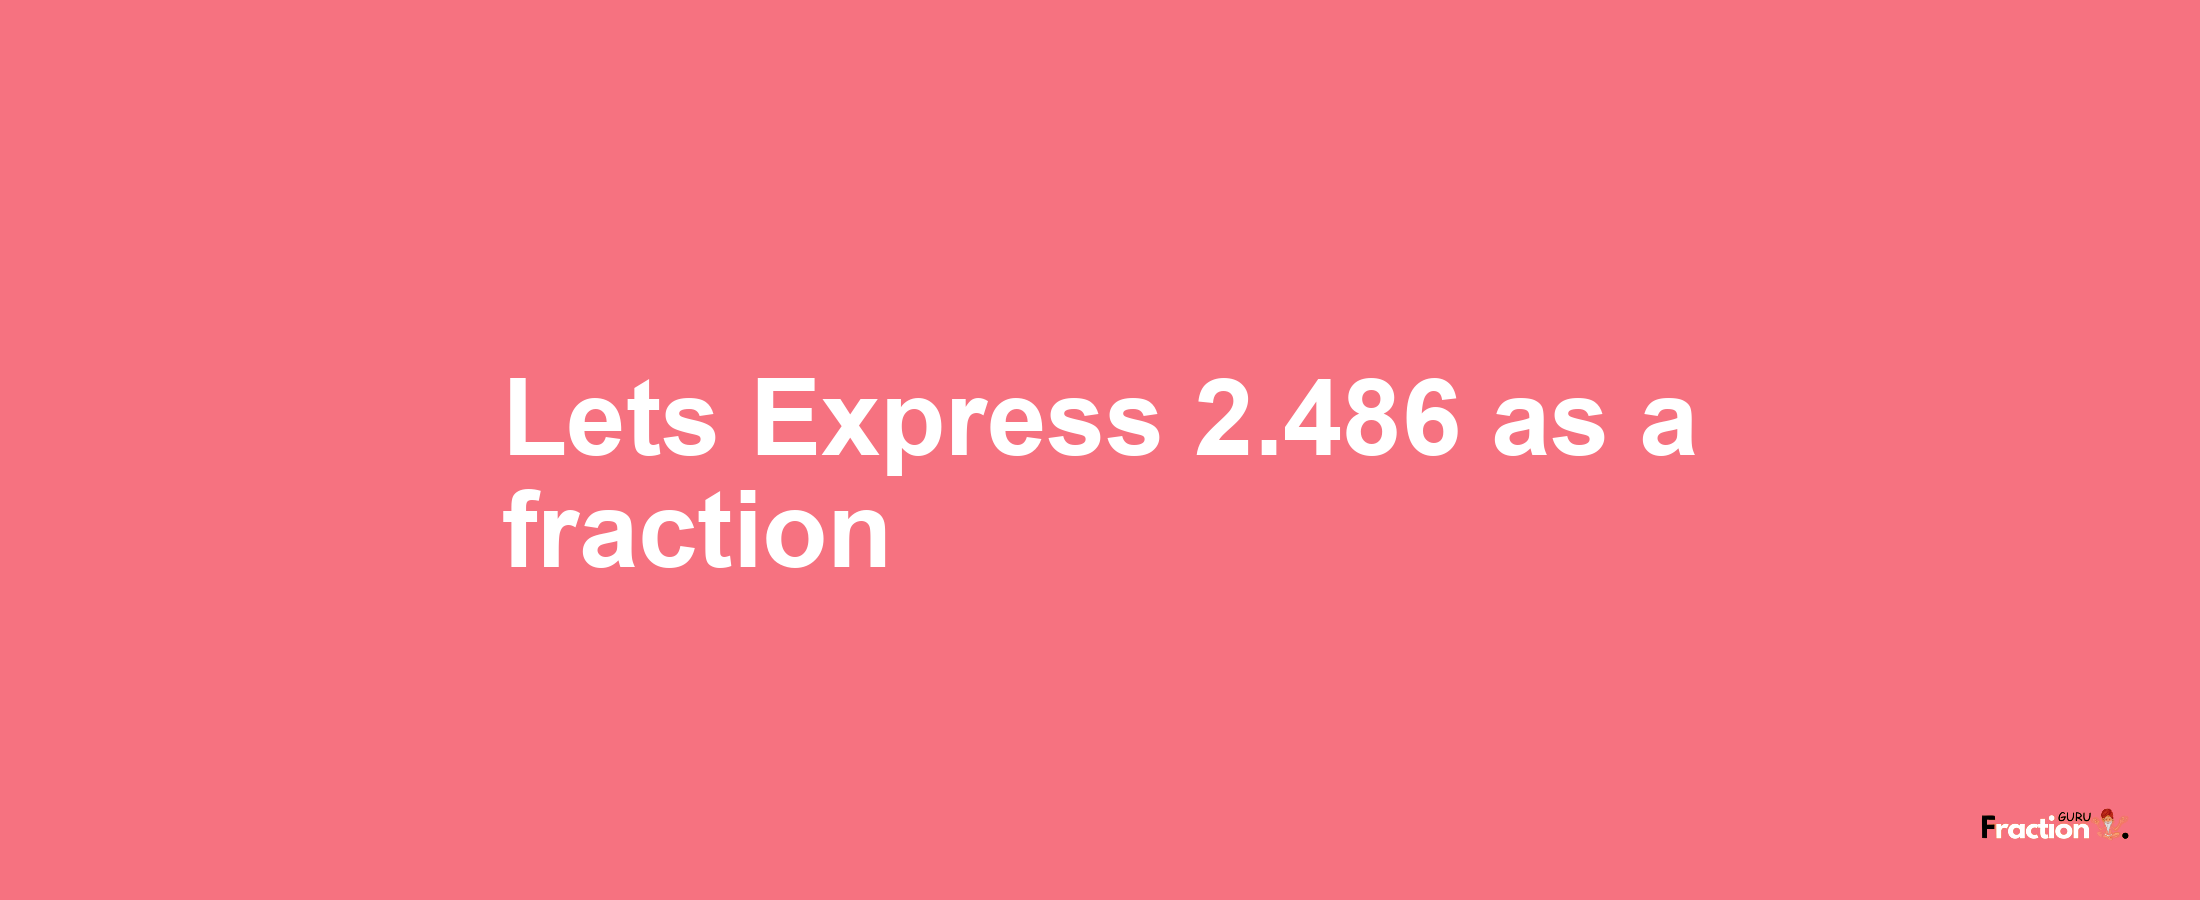 Lets Express 2.486 as afraction